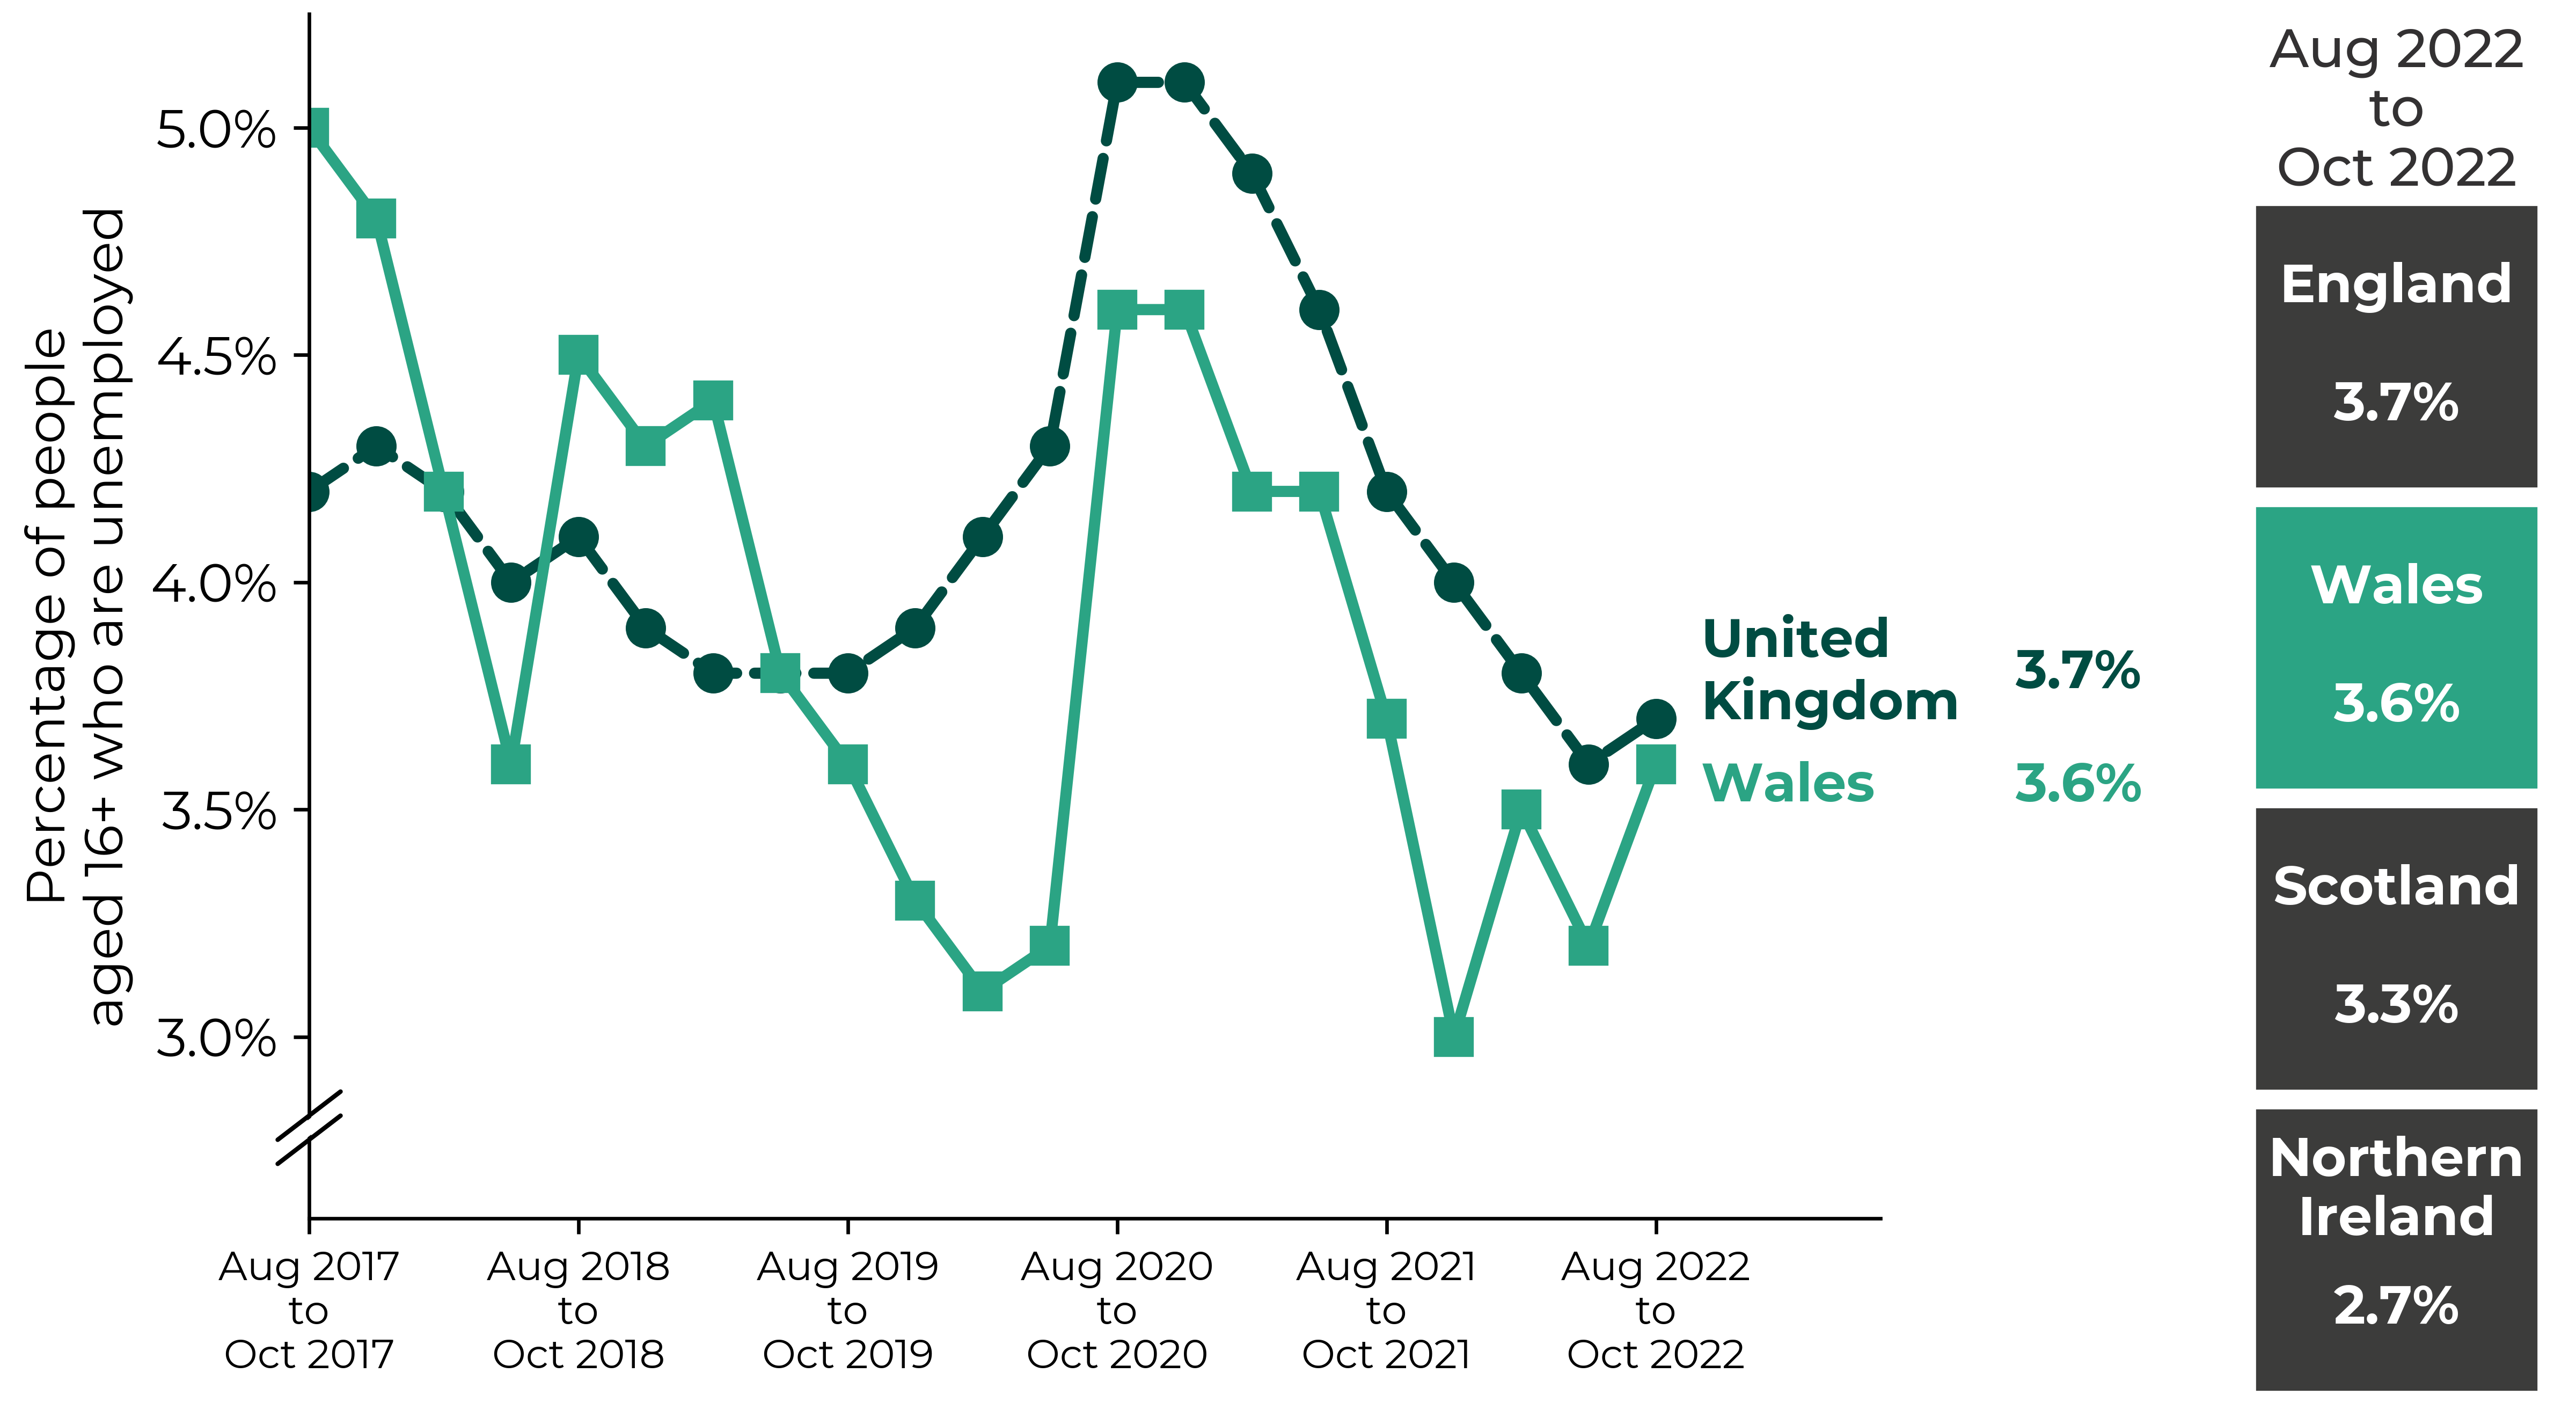 Graph showing an overall decrease in Wales' unemployment rate from over 4.5% in 2017 to under 3% in early 2020. This was followed by a peak of almost 5% during the period December 2020 to February 2021. UK unemployment rate followed a similar pattern. Figures for the latest period (August 2022 to October 2022) are Northern Ireland 2.7%, Scotland 3.3%, Wales 3.6%, England 3.7% and UK 3.7%.